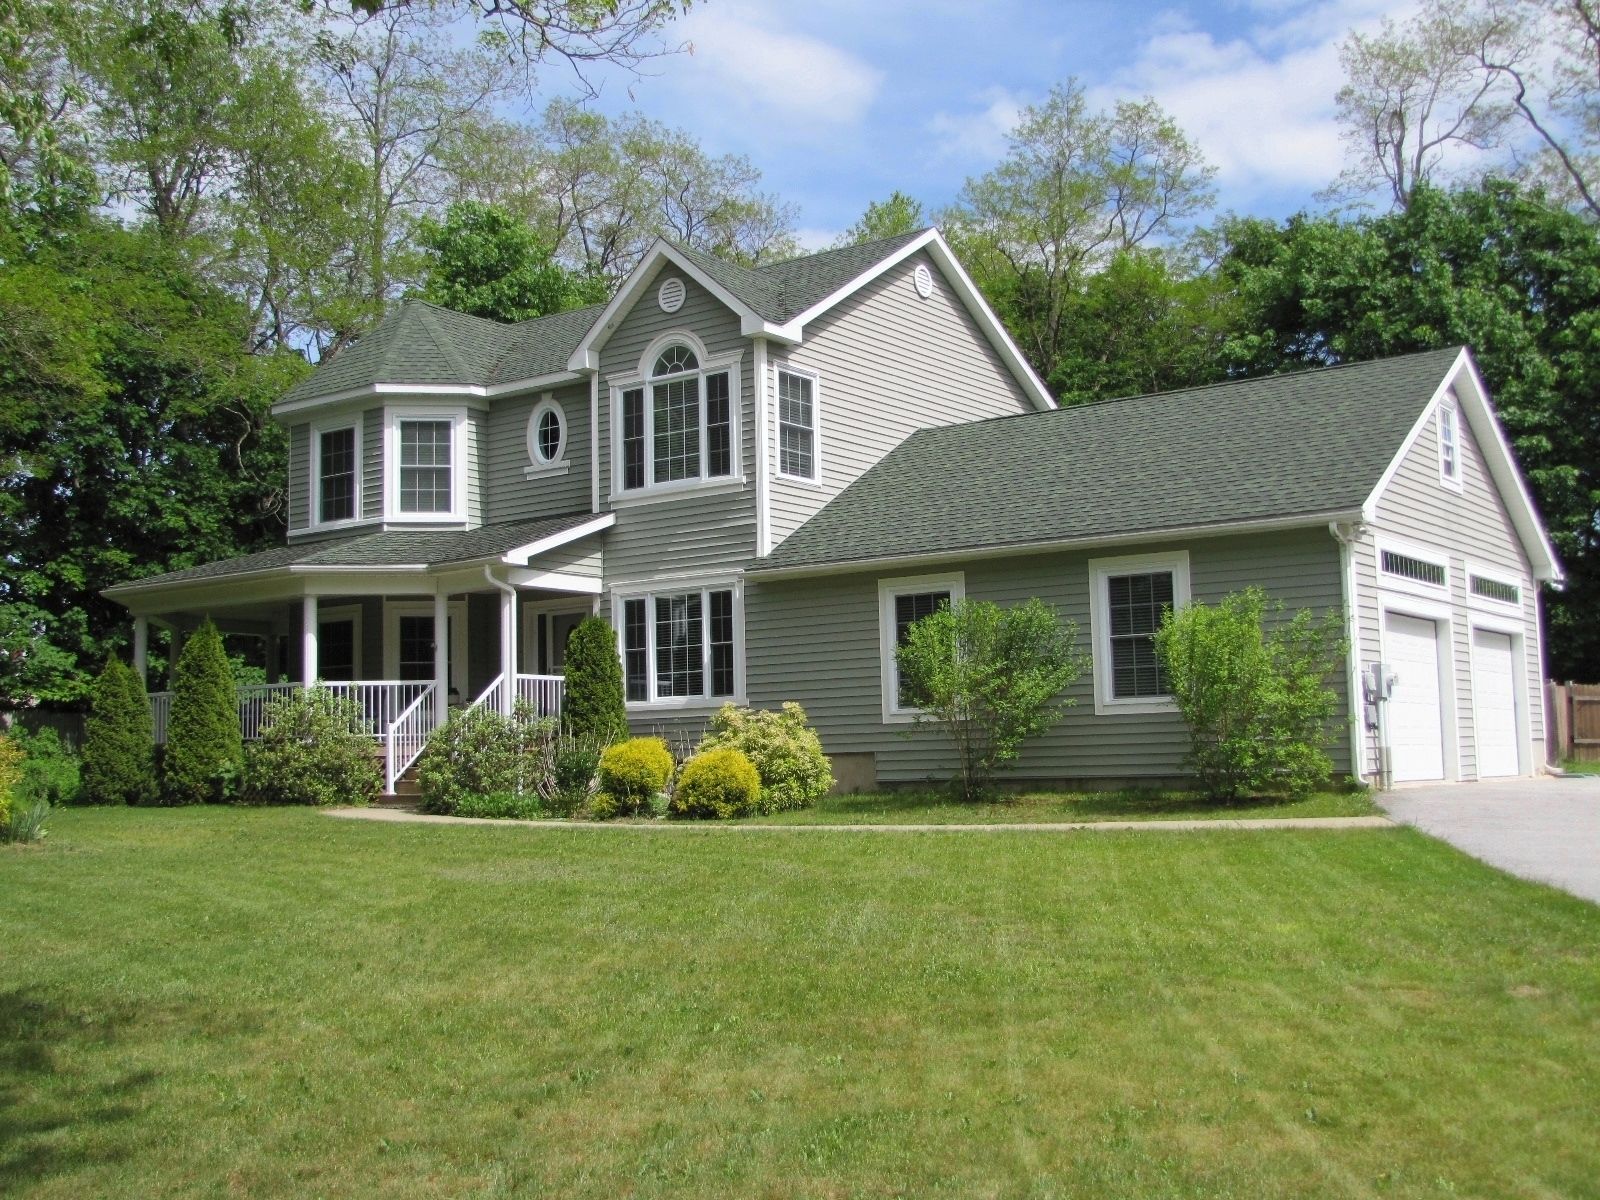 Belfast, Maine Real Estate Listing - Contemp. Victorial with 4 Bedrooms, 2.5 Baths, Hardwood Floors For Sale 